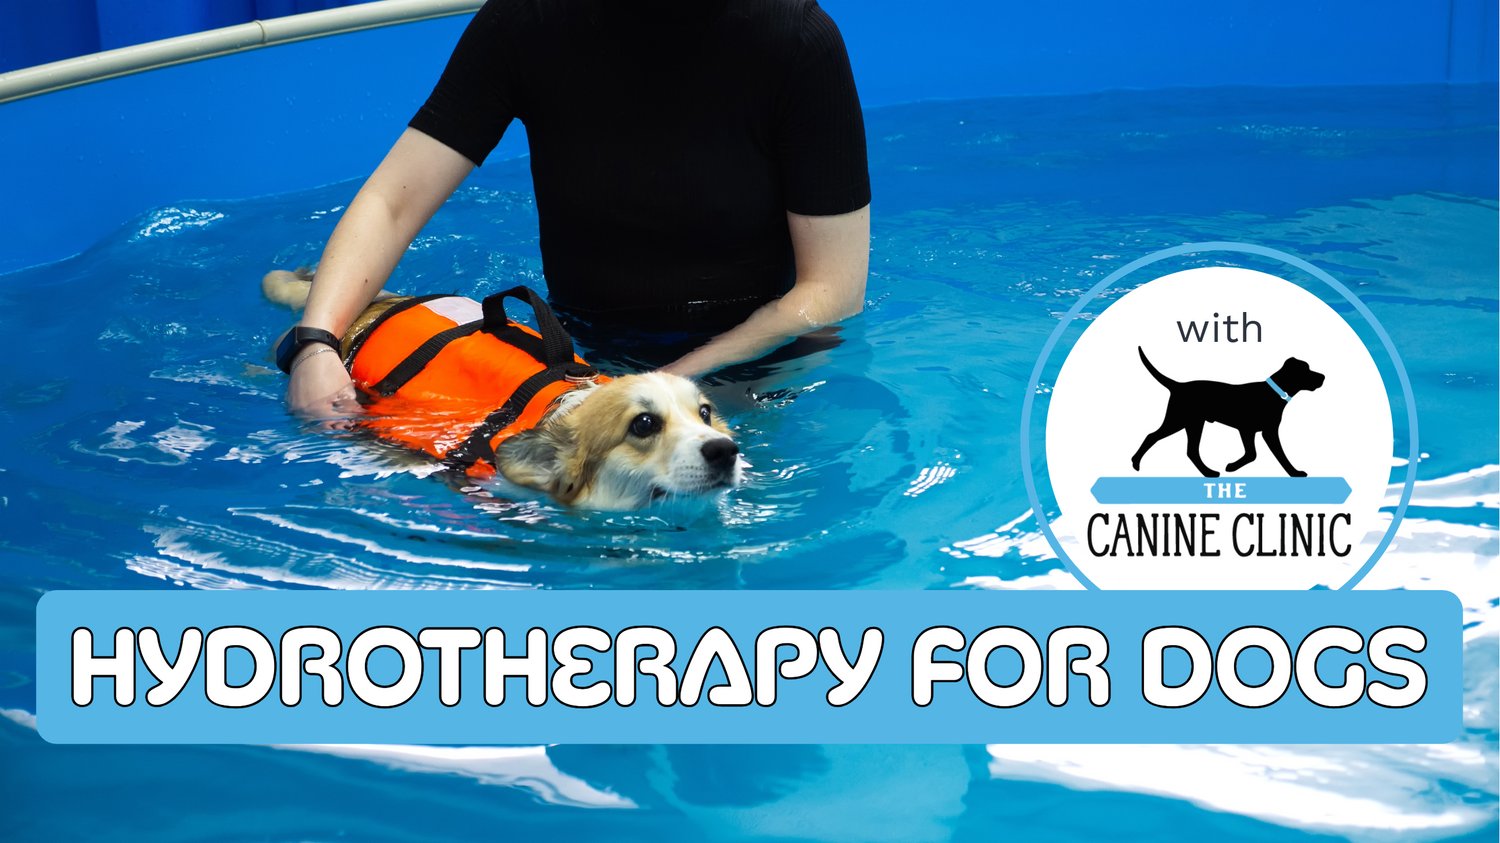 A dog in a pool with an orange harness supported by a human and a box with text “Hypnotherapie for dogs”